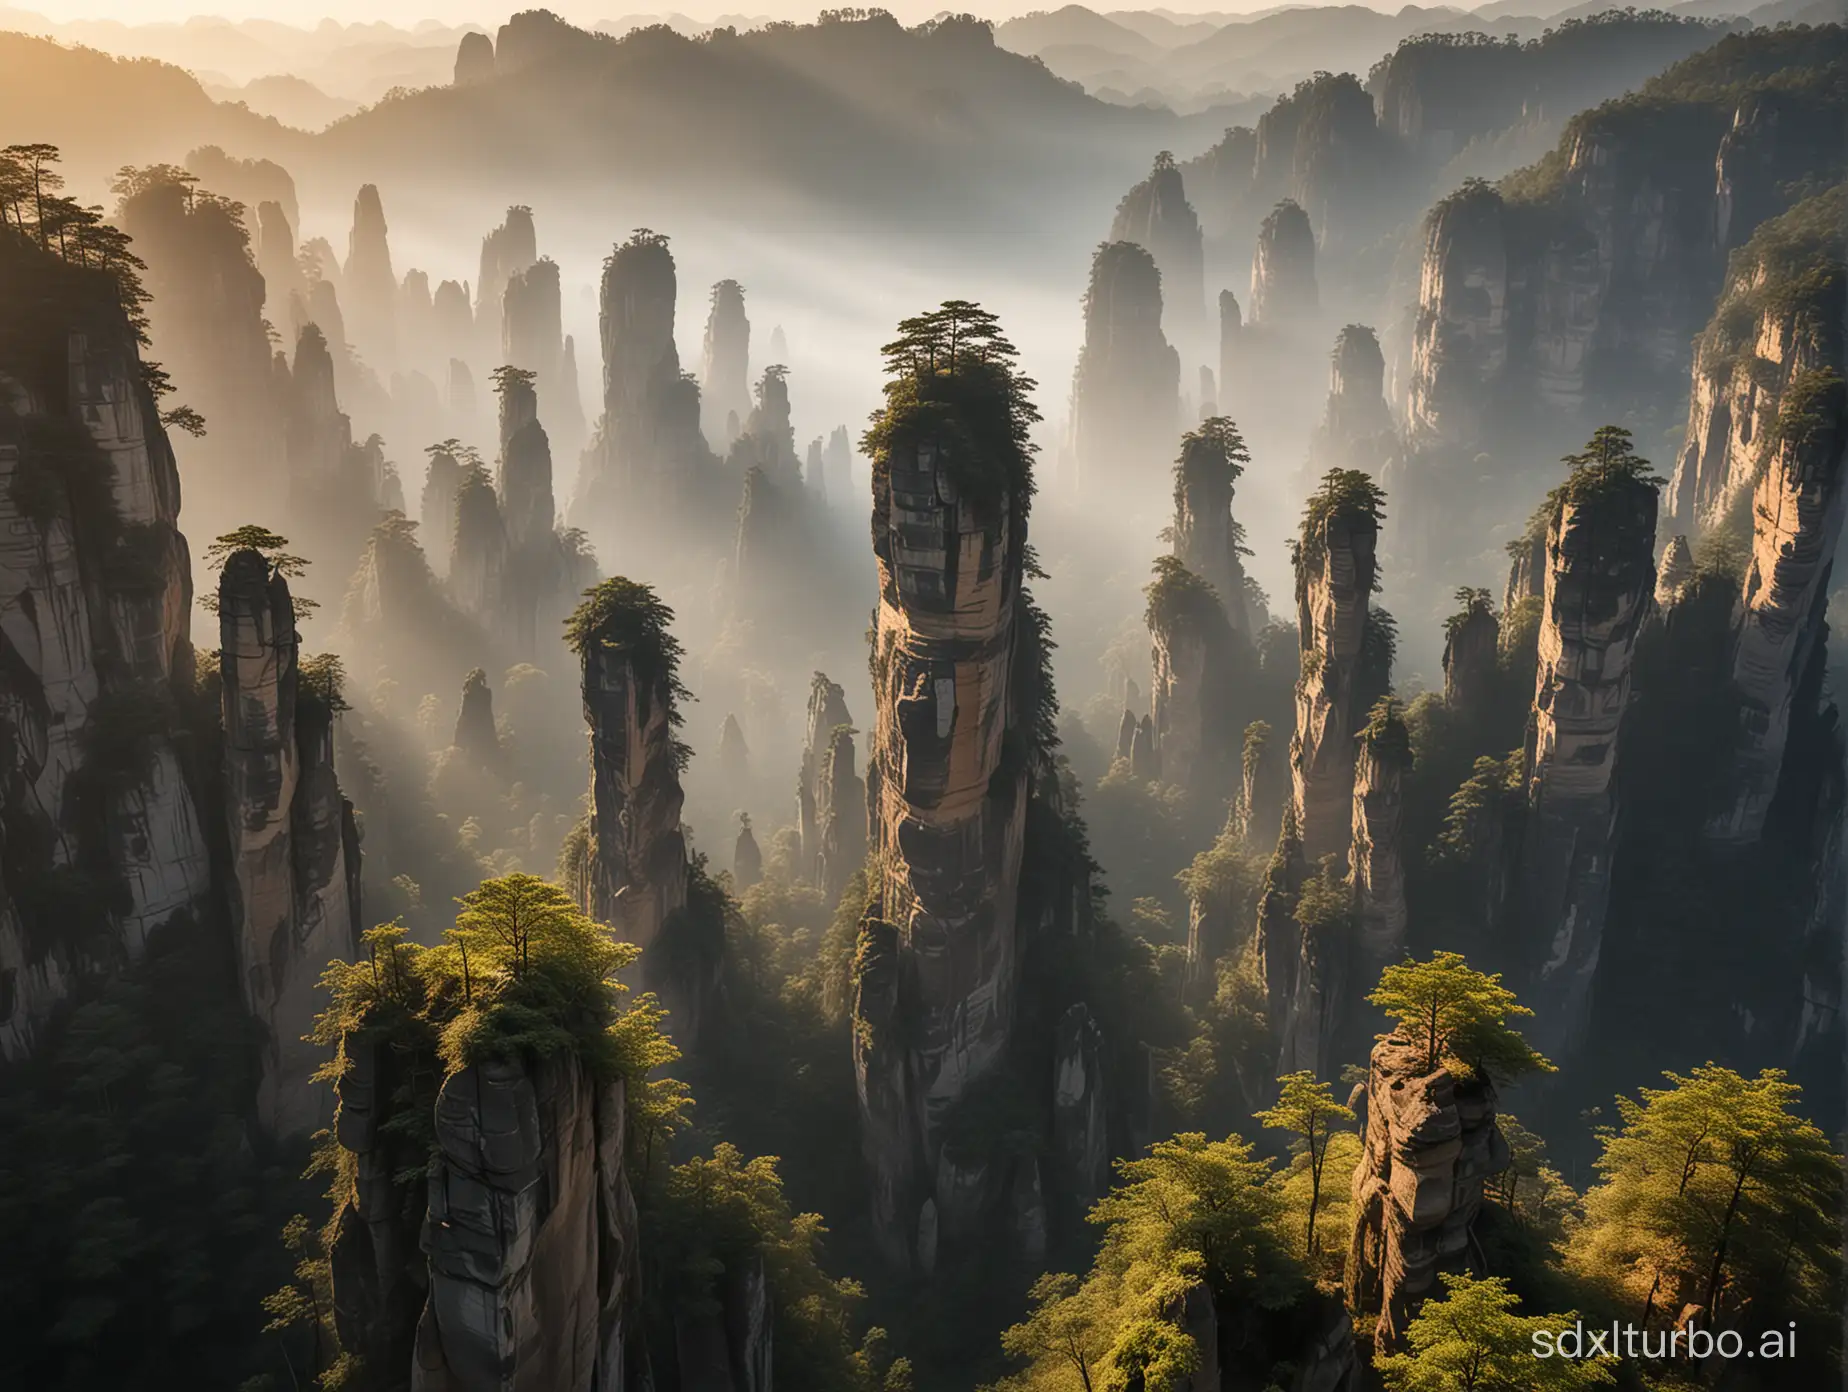 Create a wide-aspect aerial view of a mountainous landscape during the golden hour. The scene is enveloped in a soft mist, which gives it an ethereal quality. Towering karst formations rise steeply from the forested floor, and the play of light and shadow adds depth to the vista. It's reminiscent of the type of scenery one might find in places like Zhangjiajie National Forest Park in China, known for its towering sandstone pillars. It's a landscape that seems to invite contemplation and exploration, evoking a sense of tranquility and the sublime power of nature.